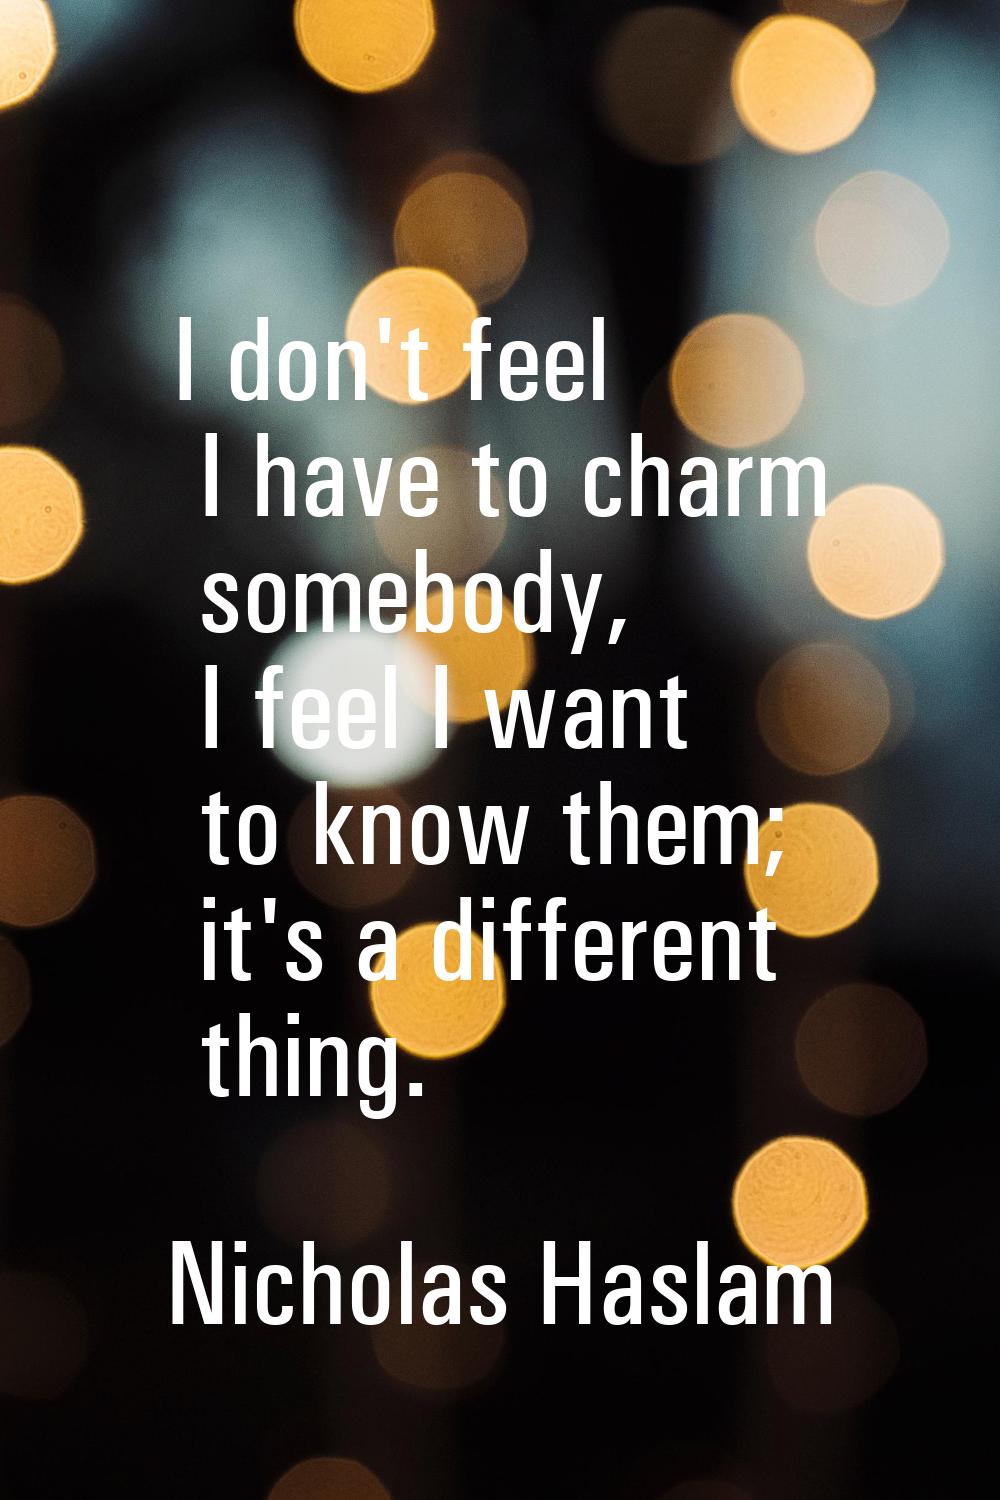 I don't feel I have to charm somebody, I feel I want to know them; it's a different thing.